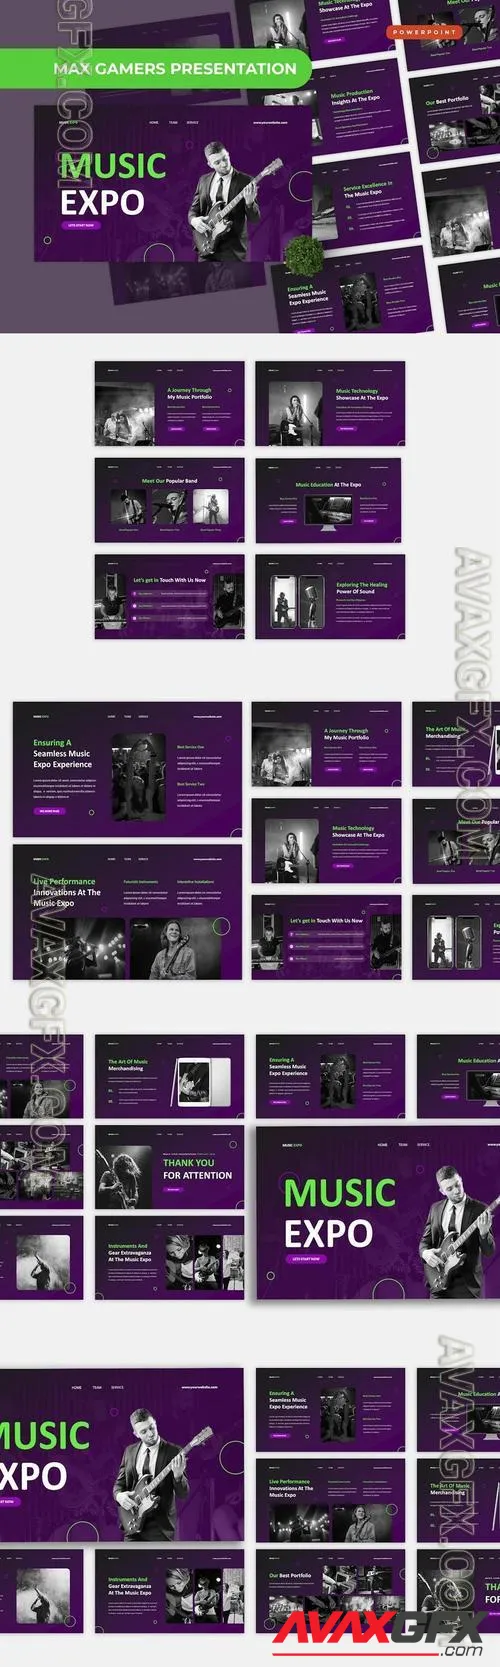 Music Expo Powerpoint Template